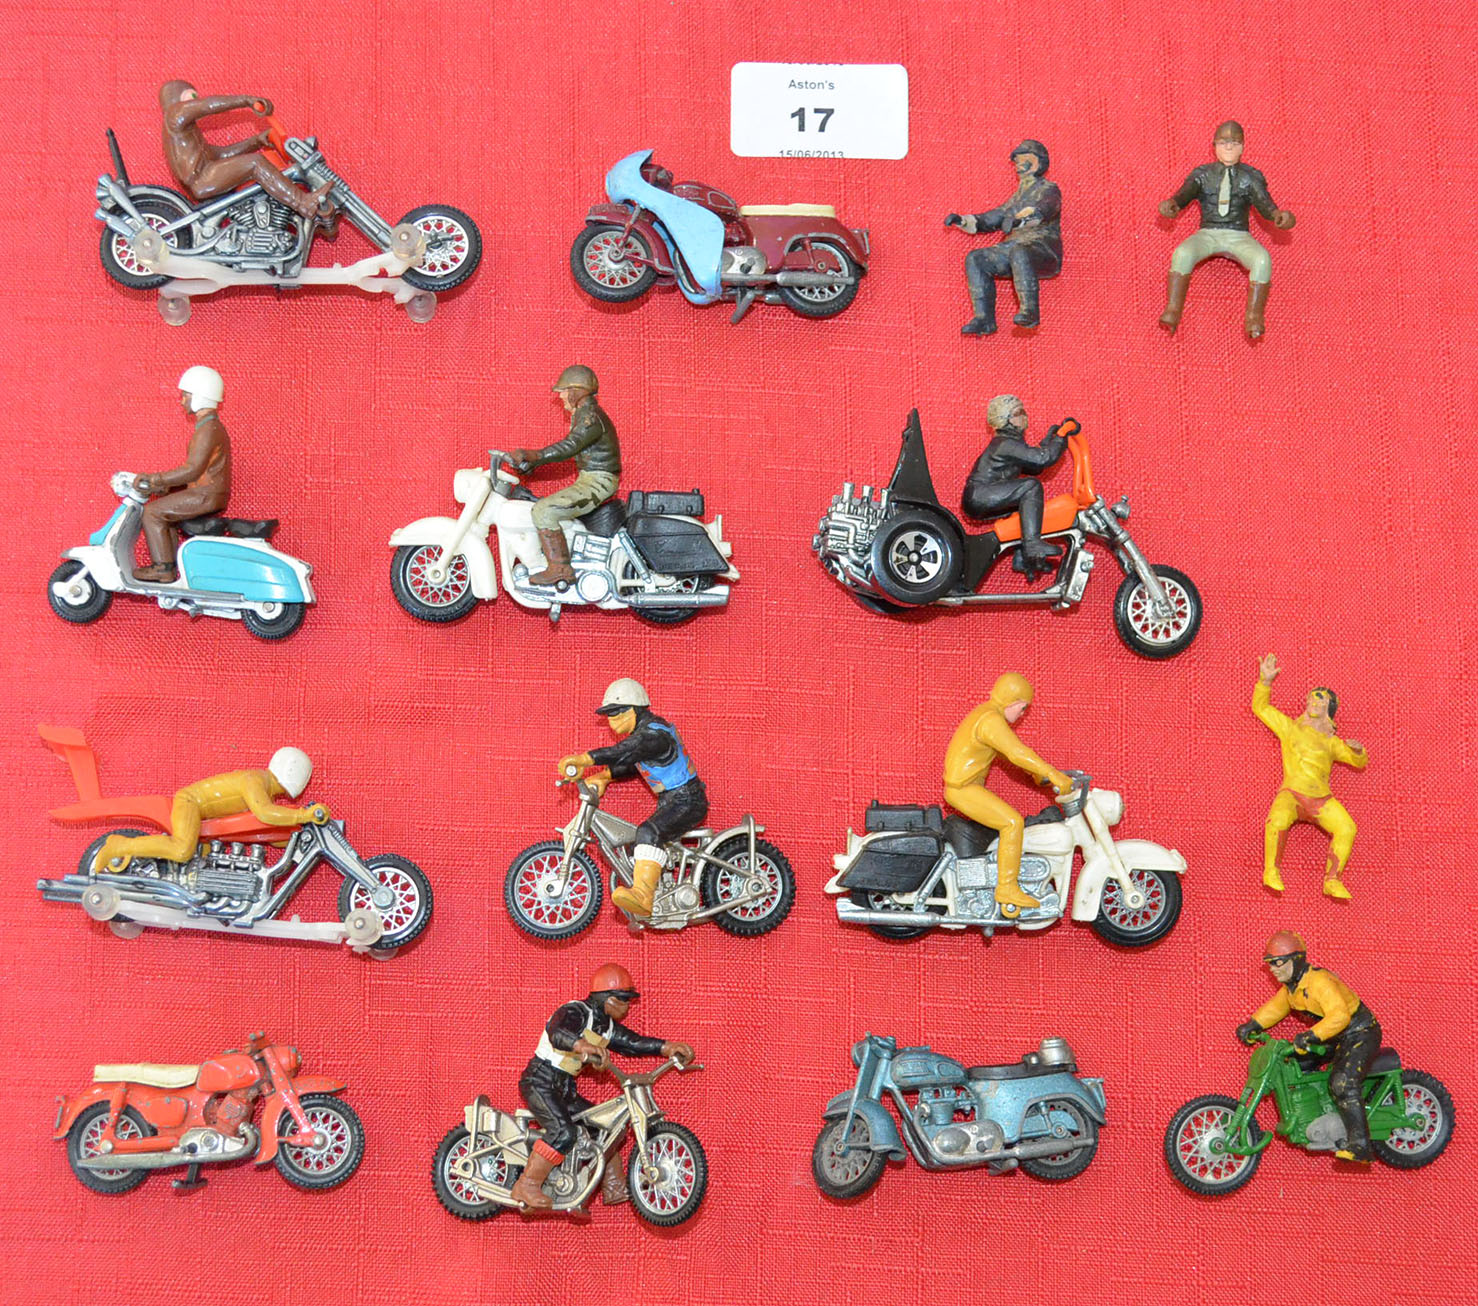 12 x Britains motorcycles with riders, F-G unboxed.